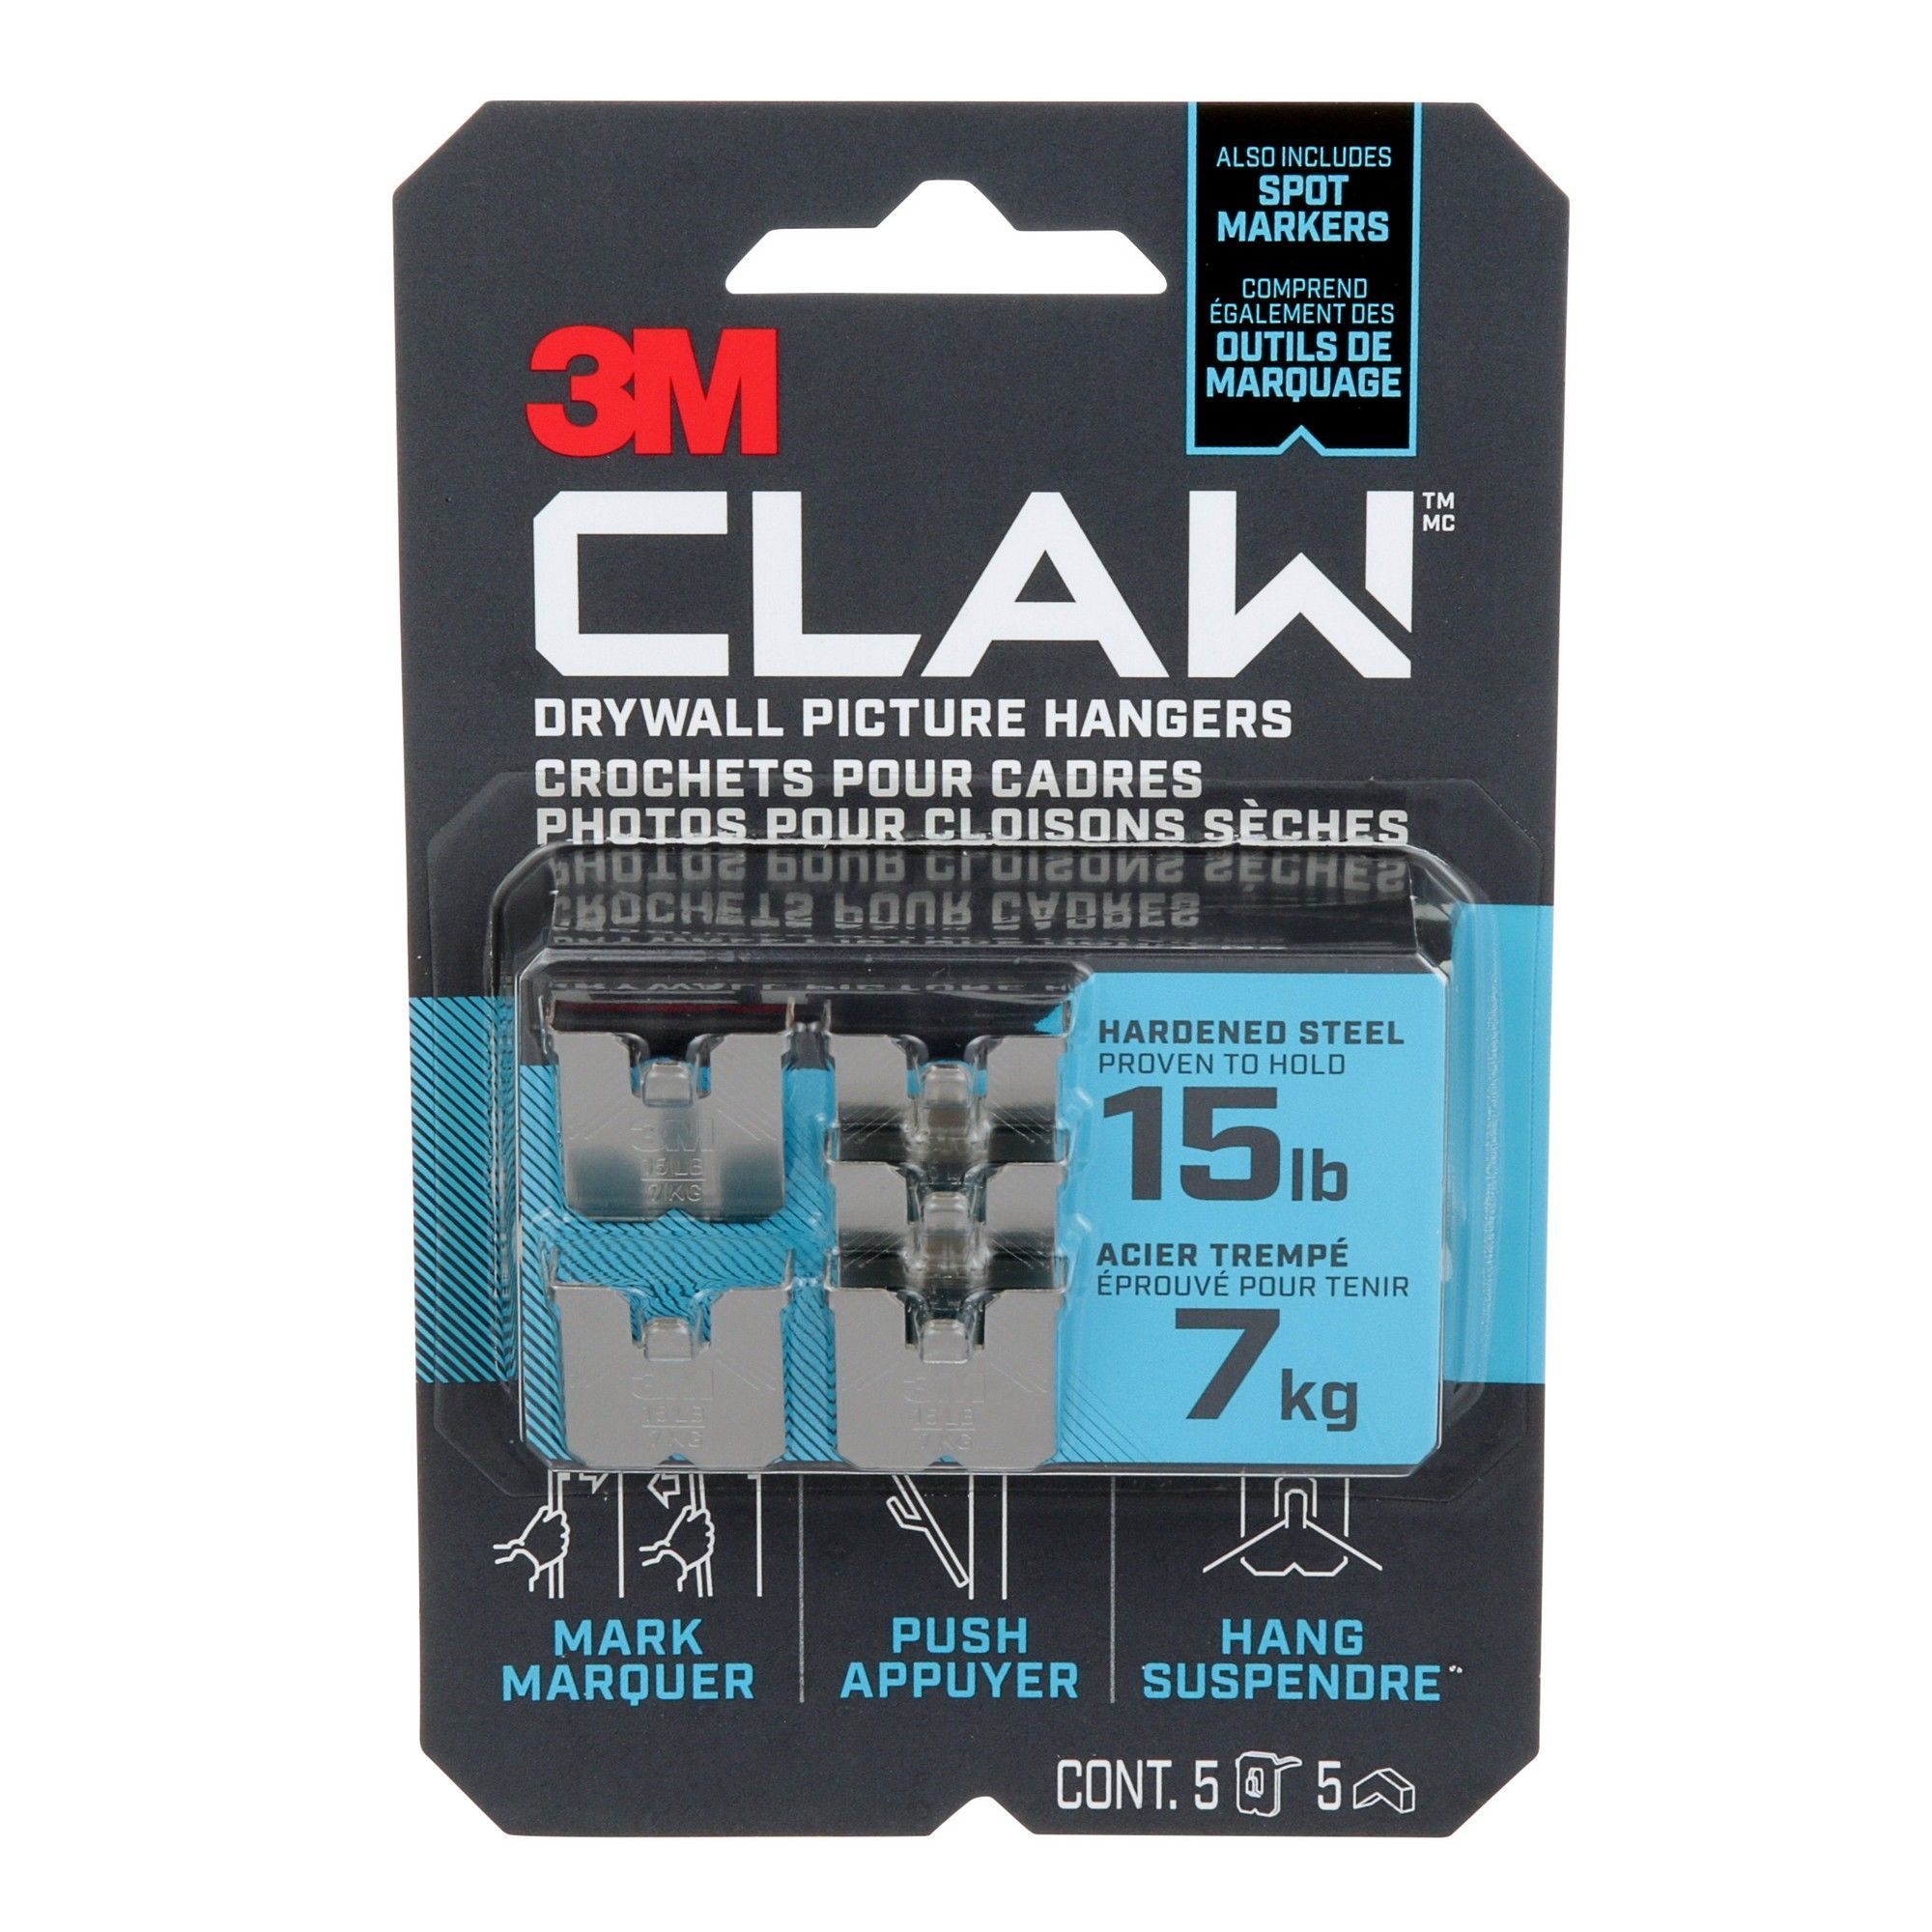 CLAW Picture Hanger - Pack of 5 from 3M